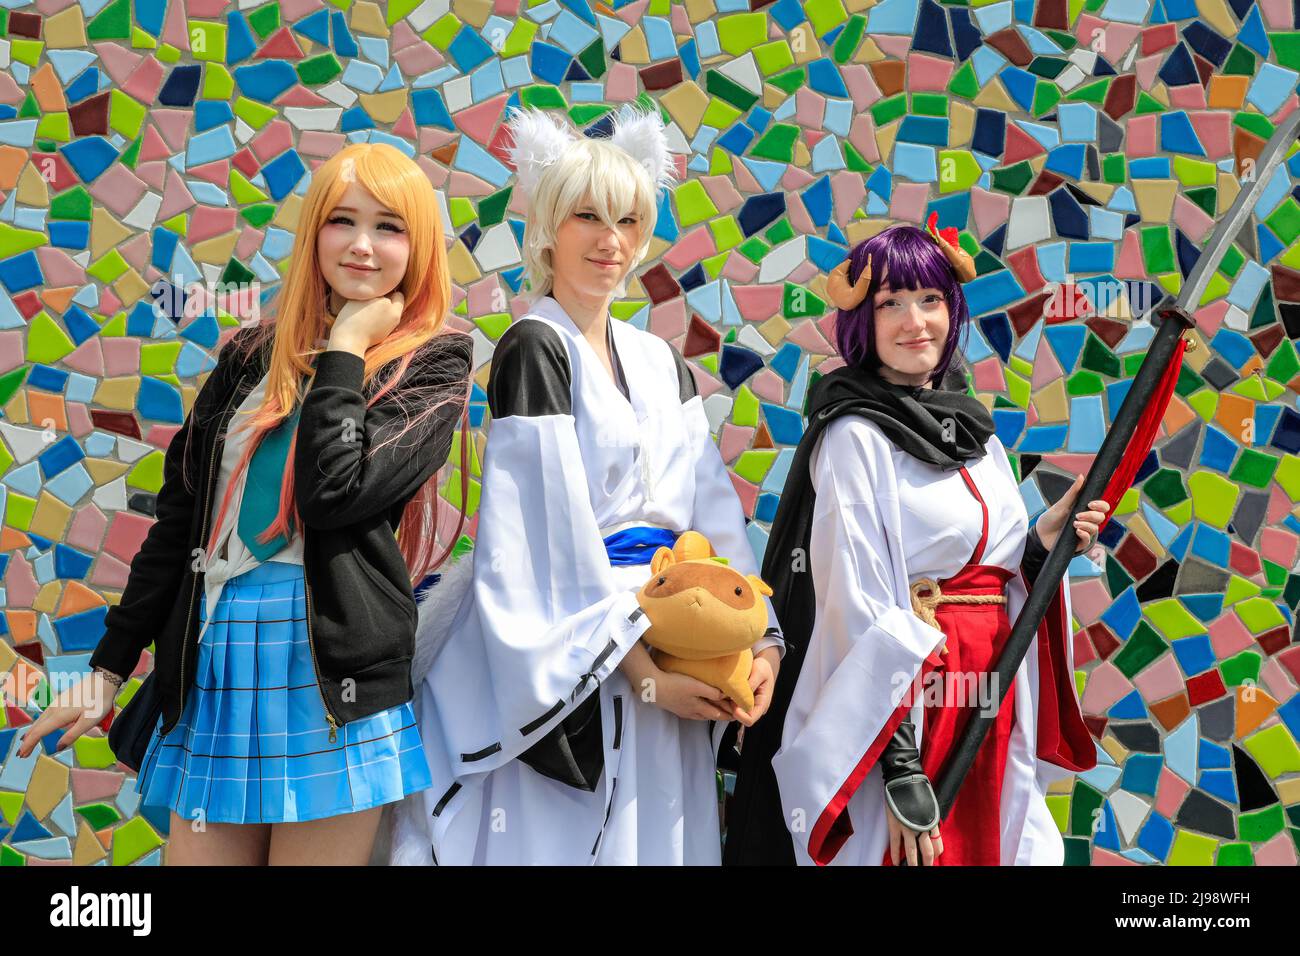 Düsseldorf, NRW, Germany. 21st May, 2022. Cosplayers happily pose by the mosaic tiling wall along the riverbank. Tens of thousands of visitors and cosplayers enjoy the warm sunshine along the river Rhine embankment in their outfits inspired by Japanese anime, video and games. Stage performances, cosplay, stalls and demonstrations of Japanese culture, sports and traditions are featured at Düsseldorf's annual Japan Day, celebrating Japan and the Japanese community in the city. Düsseldorf is home to the largest Japanese community in Germany. Credit: Imageplotter/Alamy Live News Stock Photo